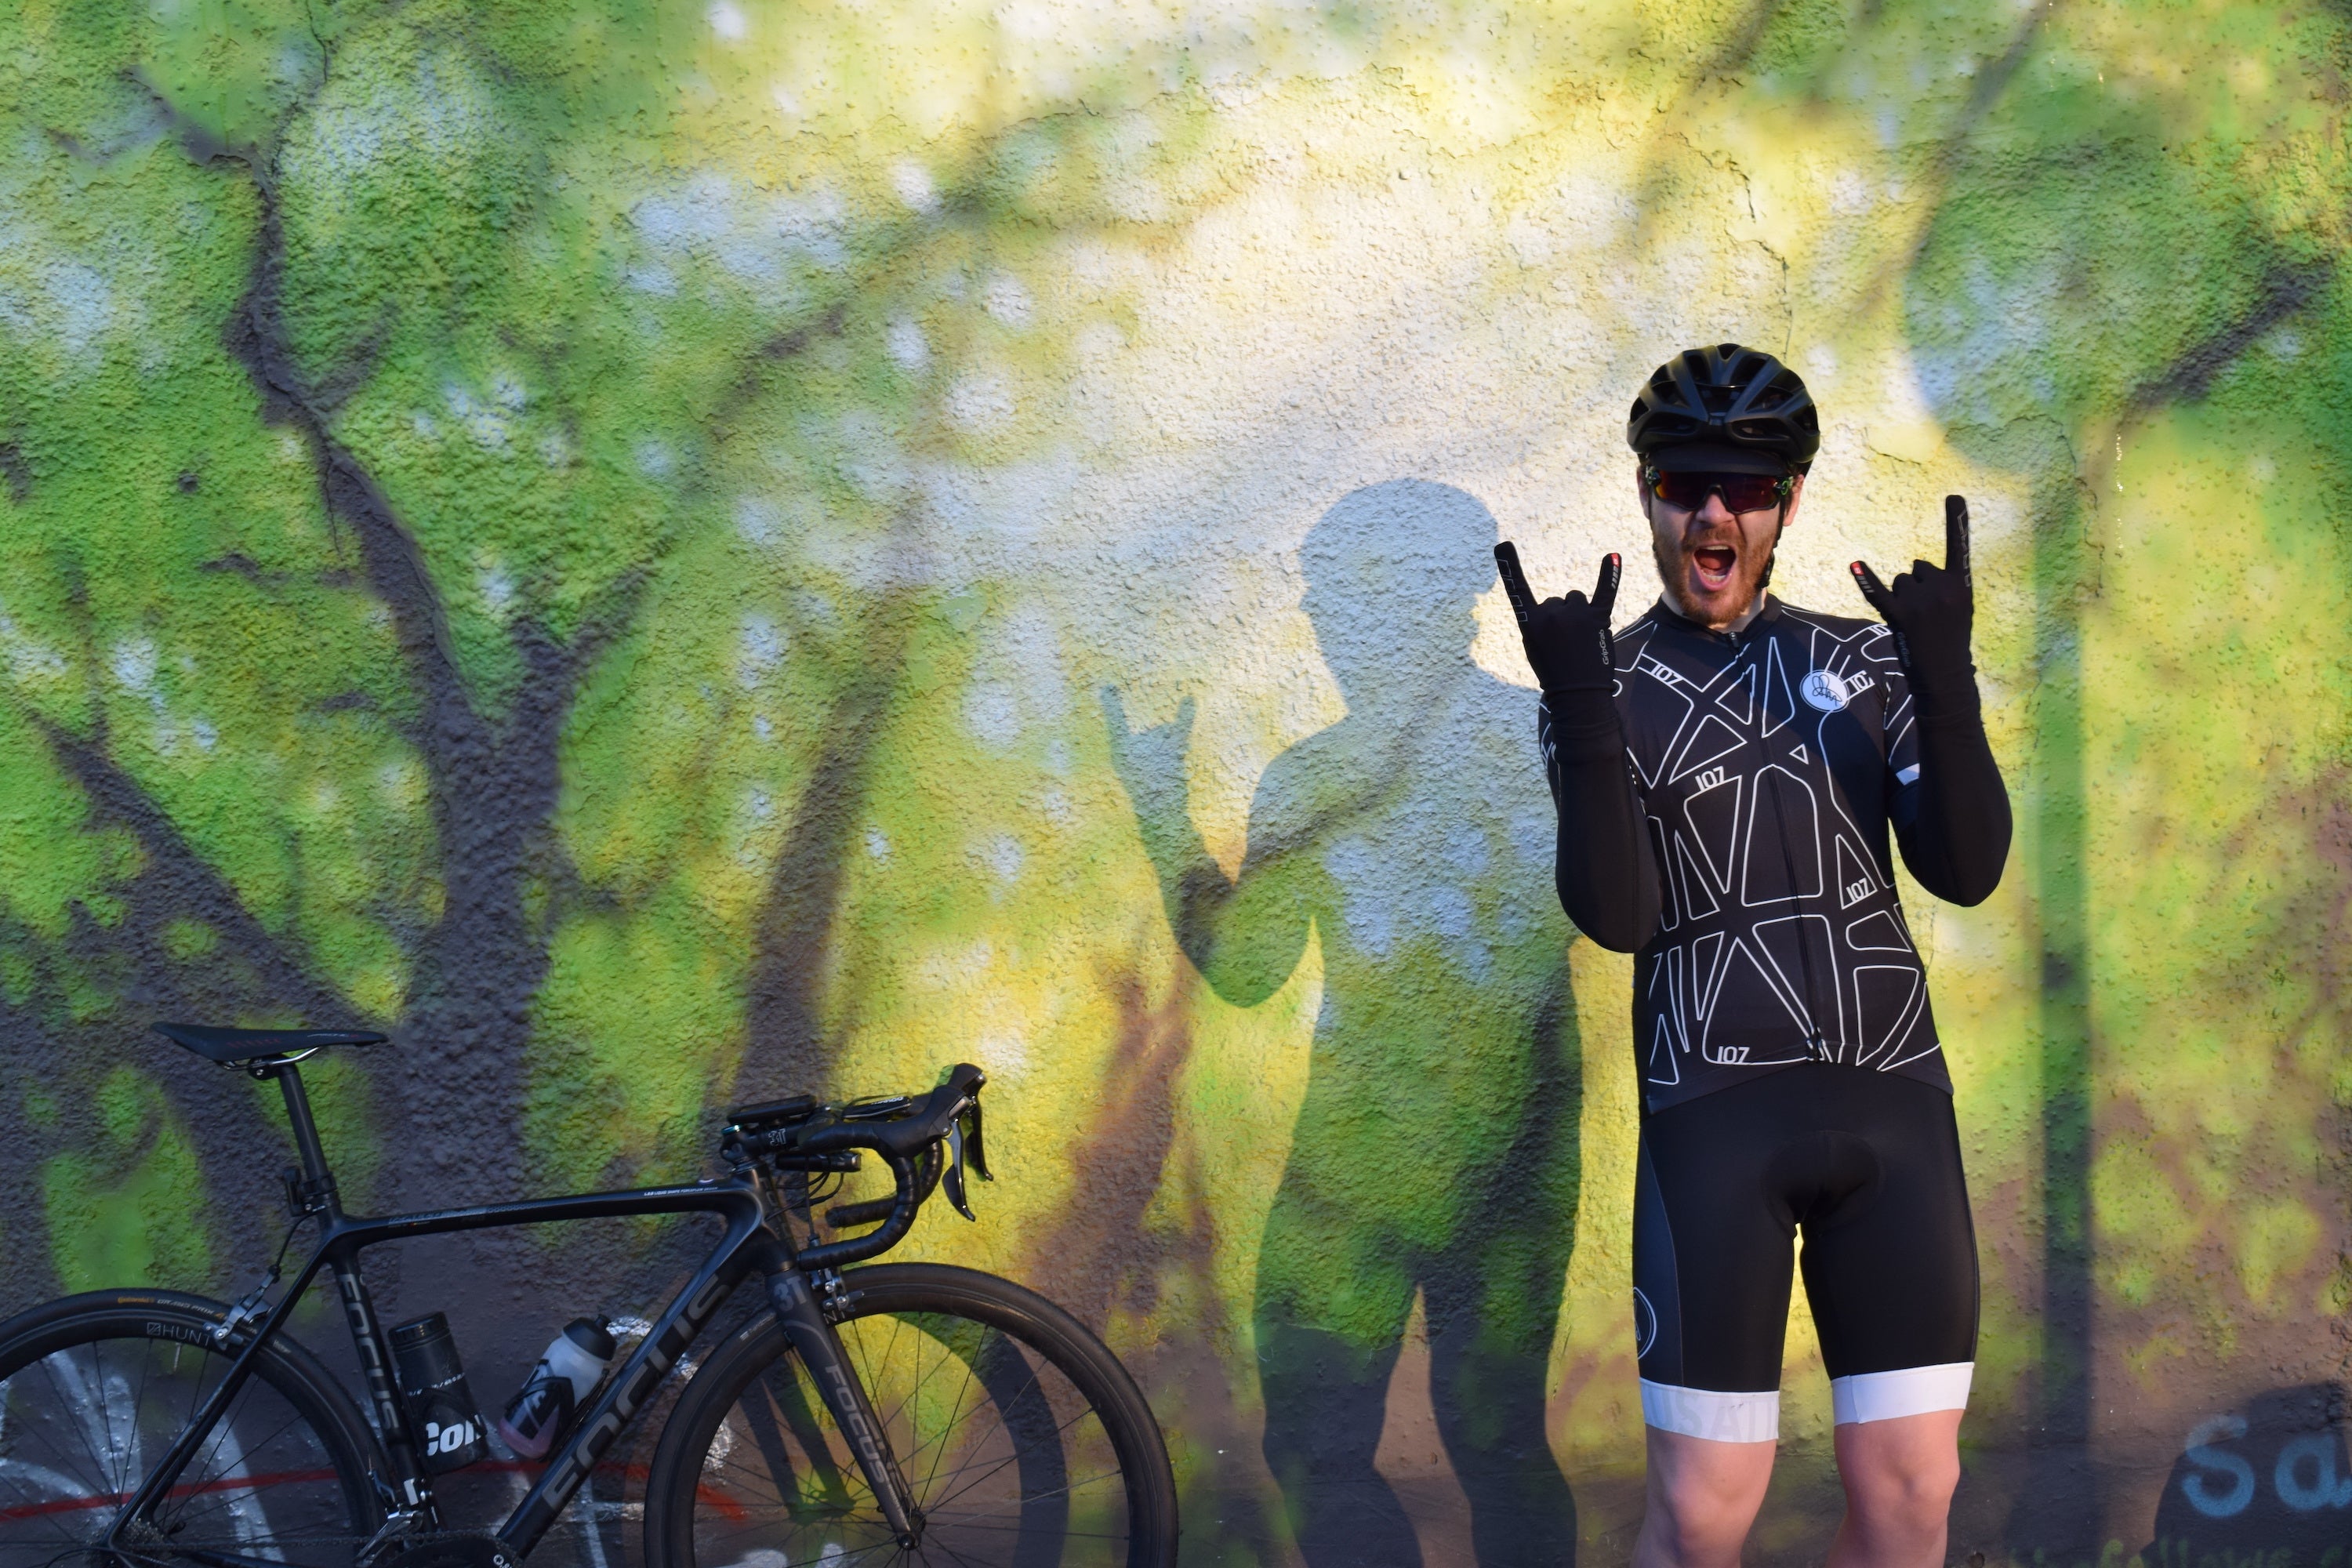 Endurance cyclist Chris Hall rides 107 for 107 challenge in Attacus Cycling jersey